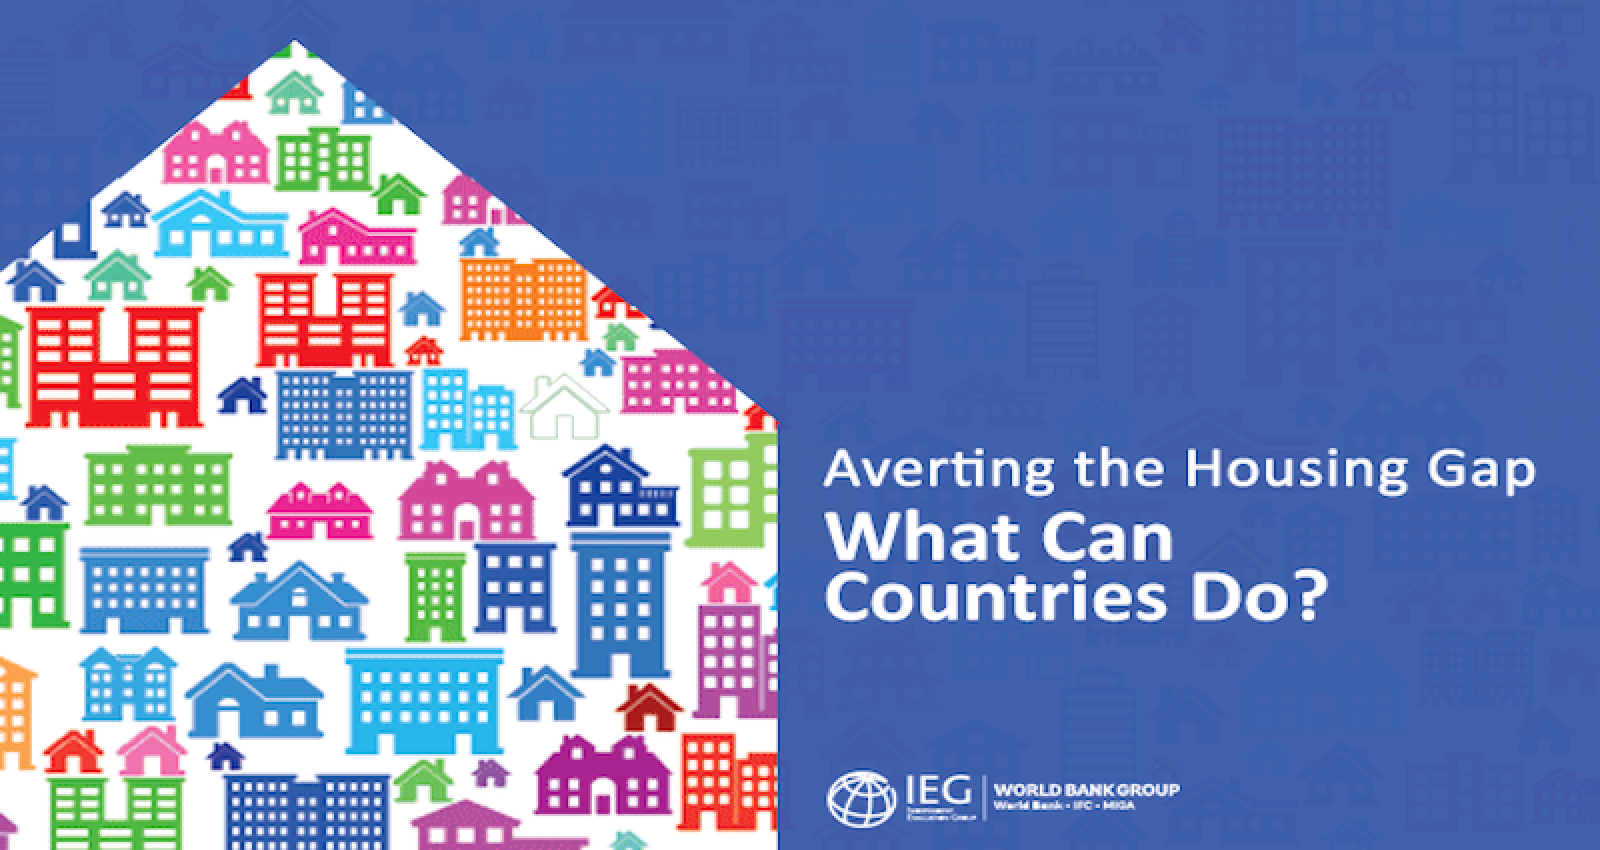 Averting the Housing Gap - What Can Countries Do?